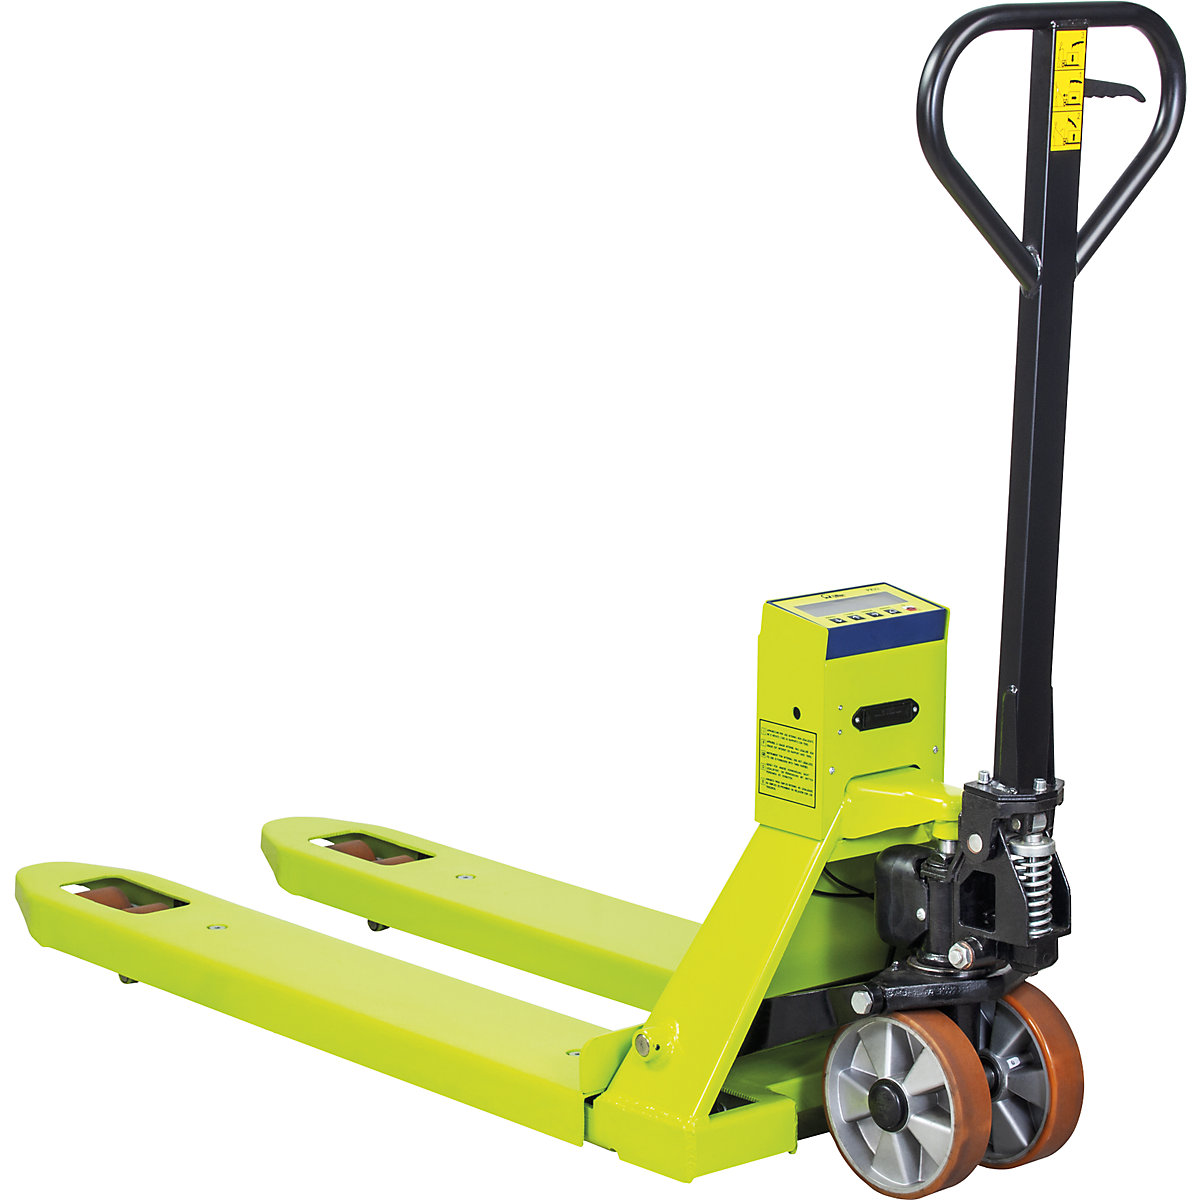 Pallet truck with scales - Pramac